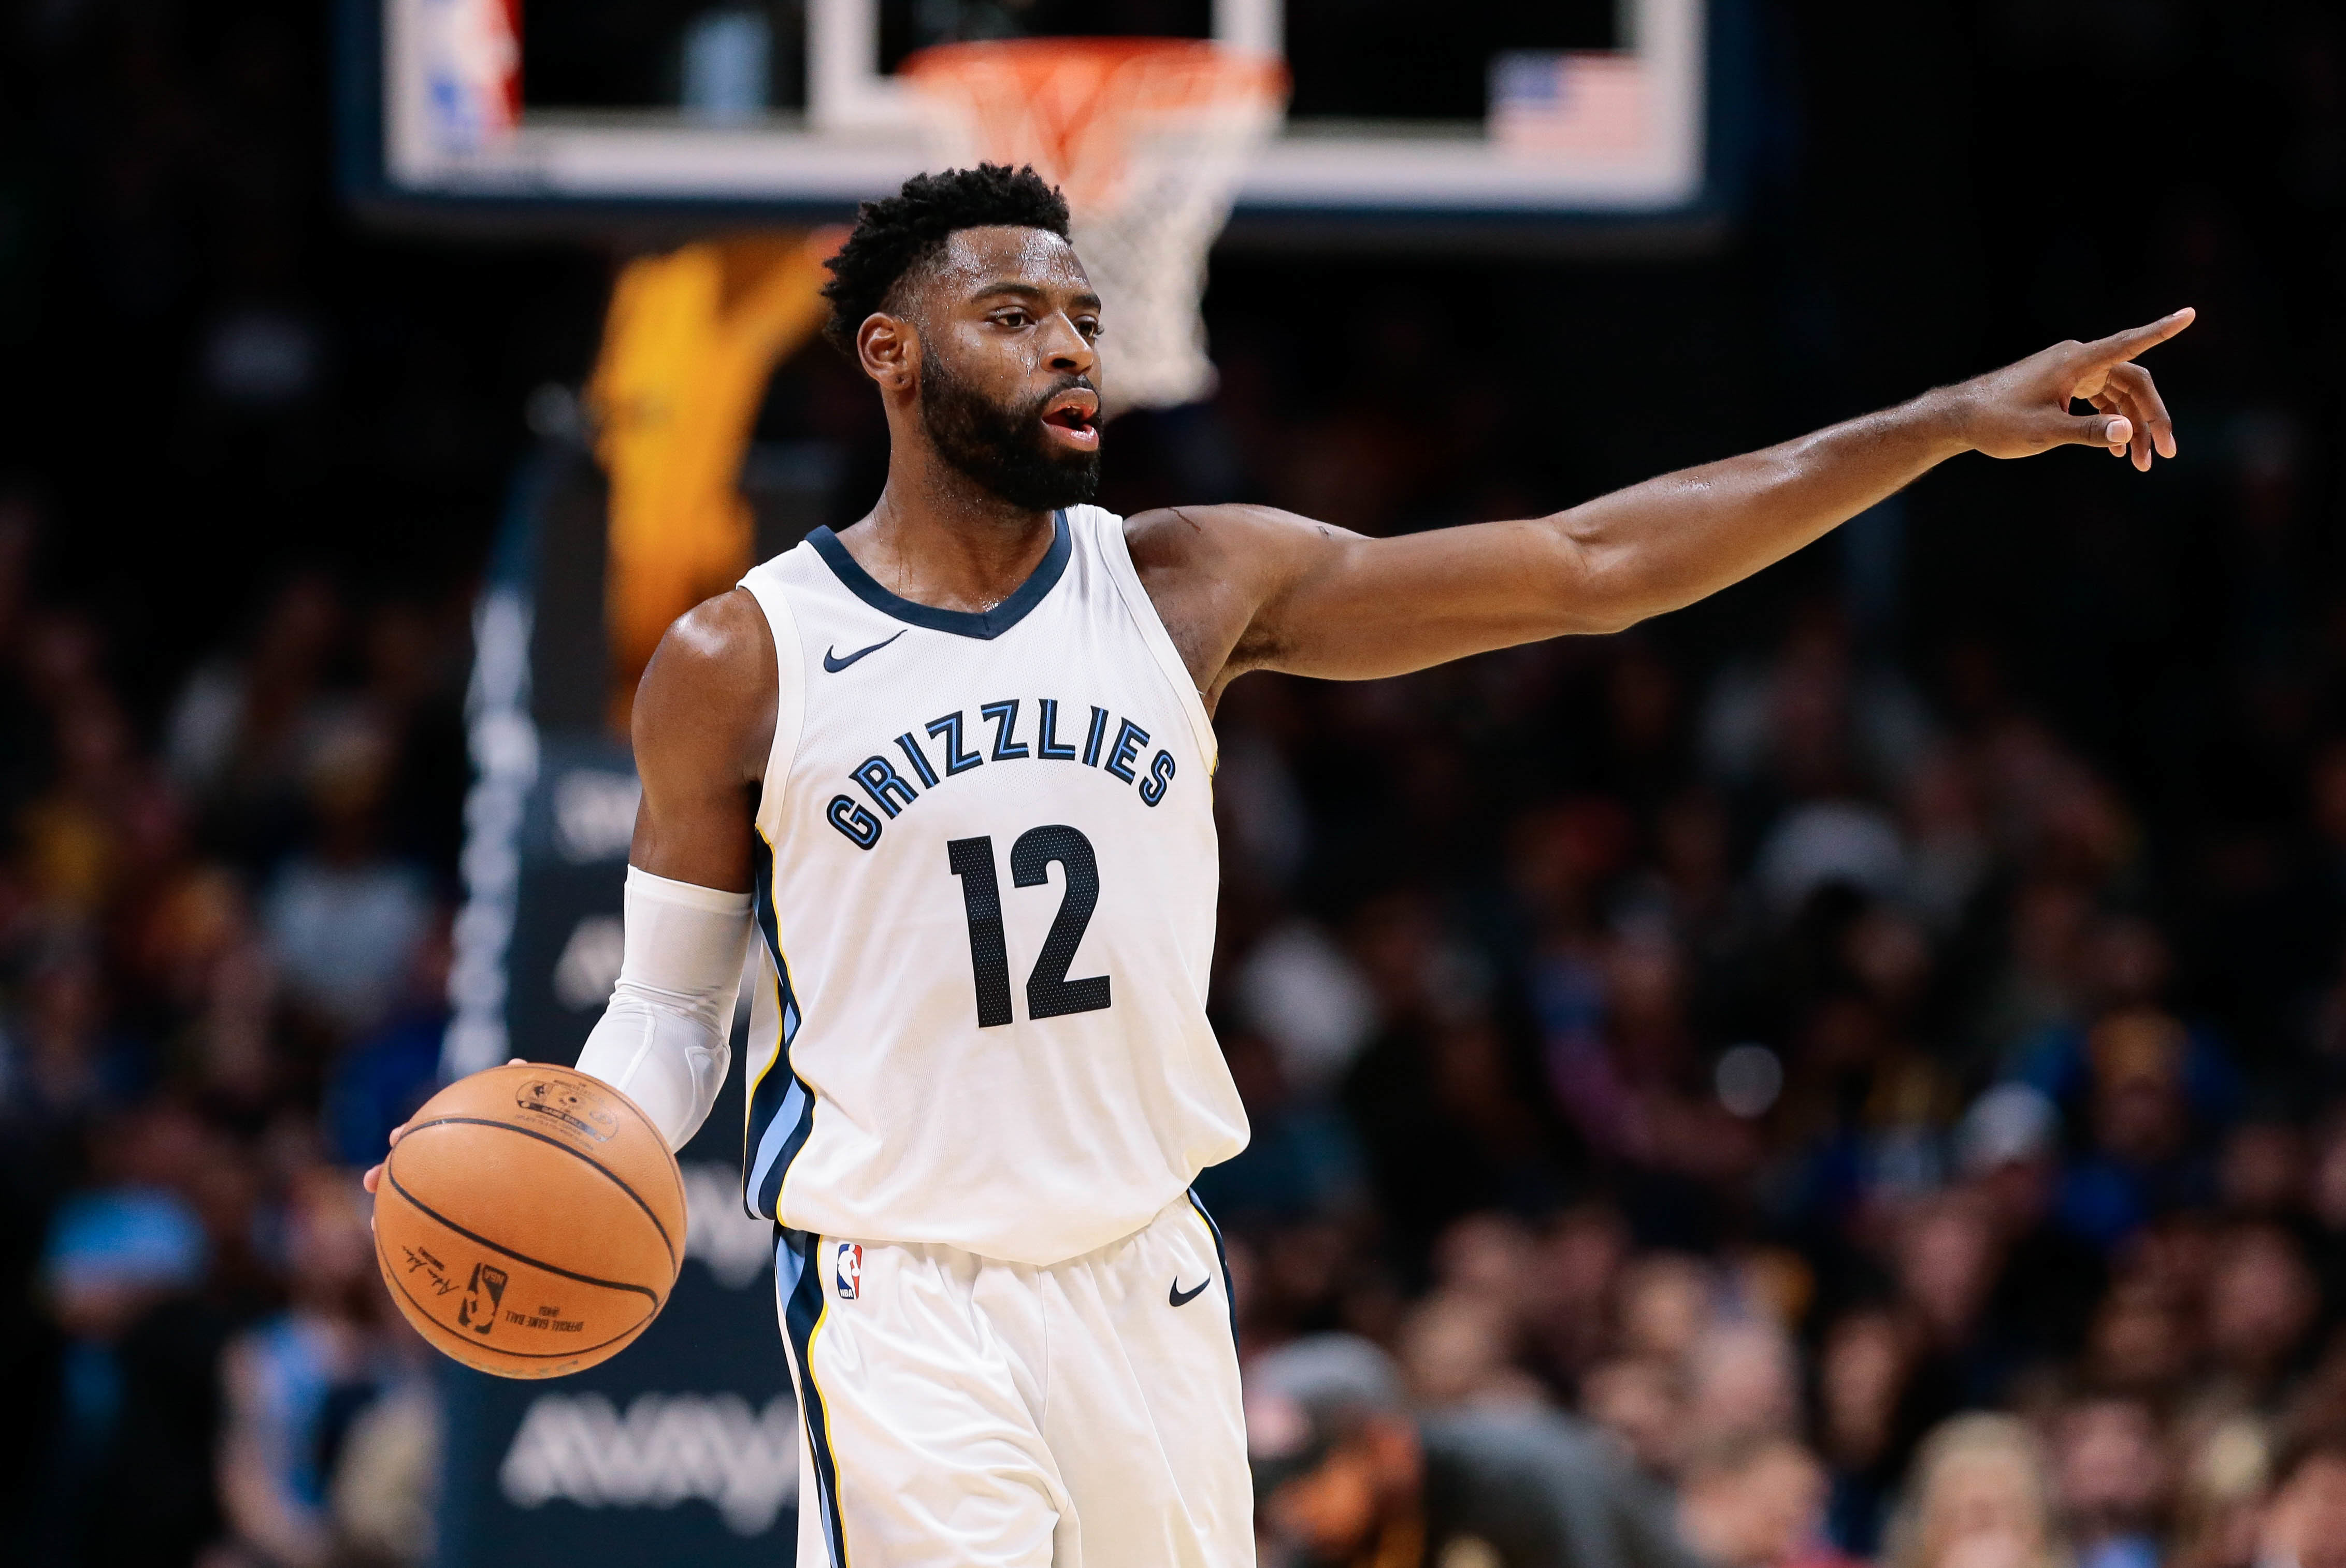 Should anyone sign Tyreke Evans? : r/nbadiscussion